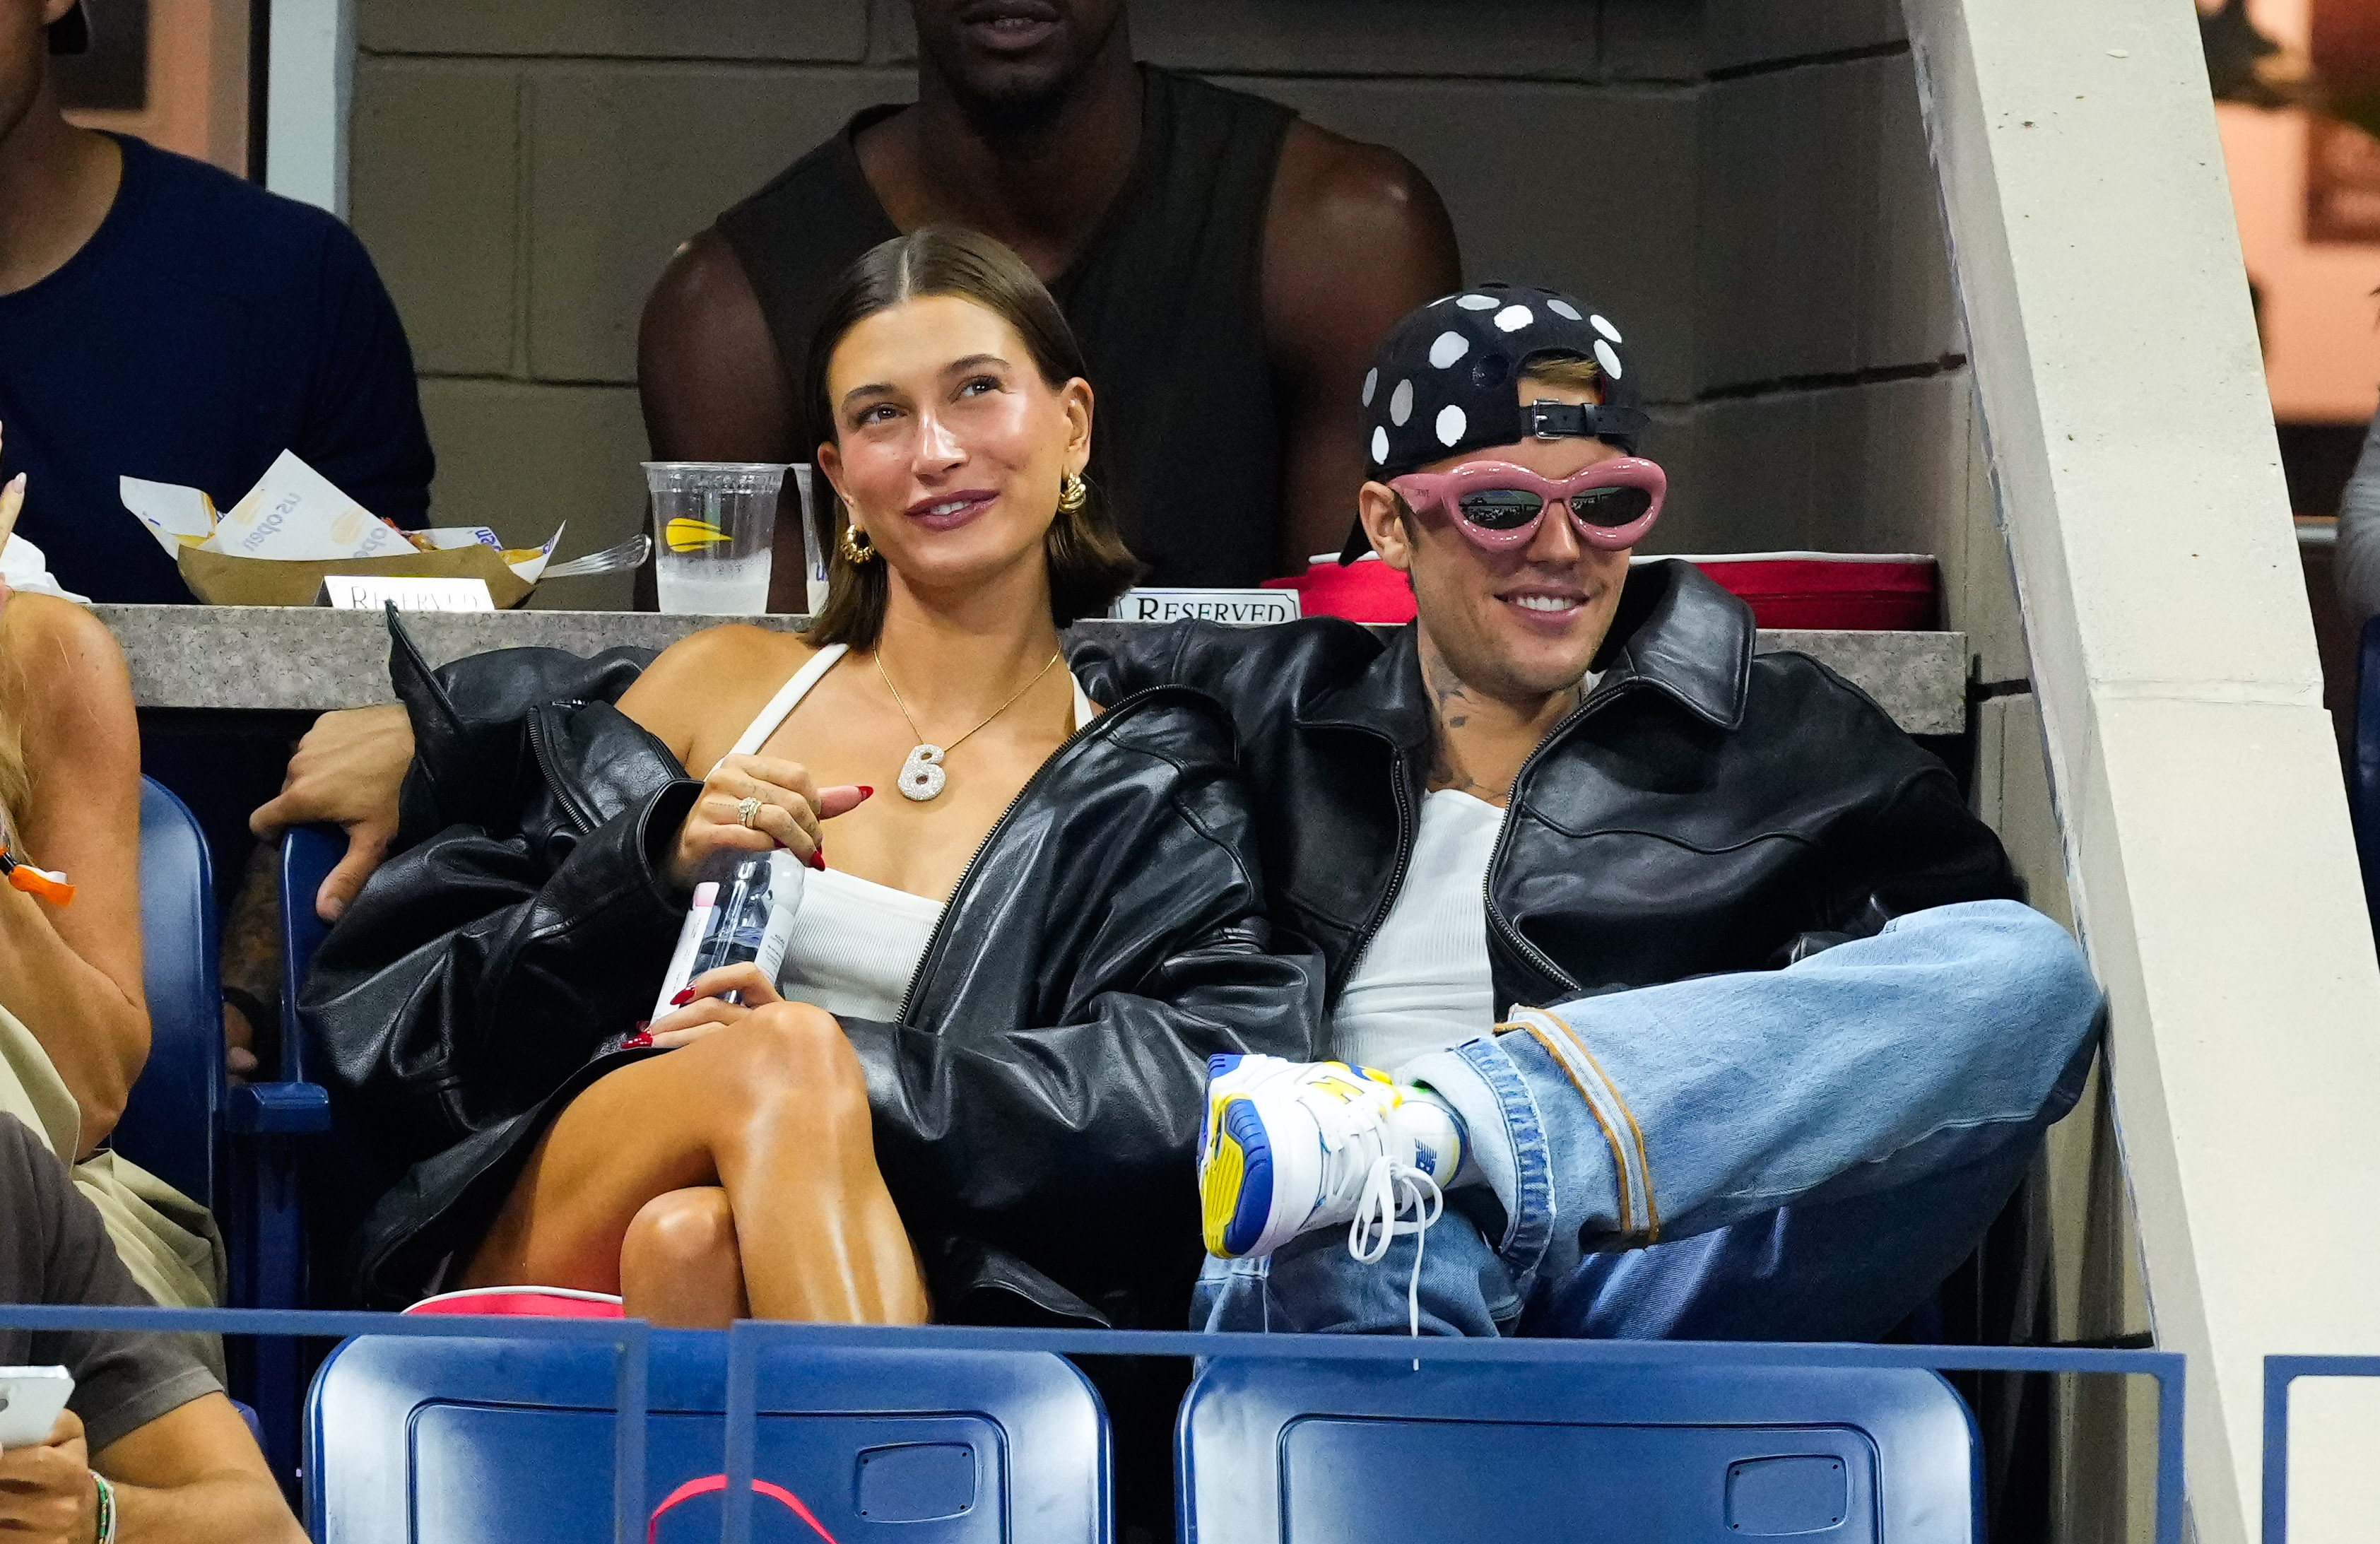 Hailey and Justin both wore oversized leather jackets while attending the US Open Tennis Championships in New York City